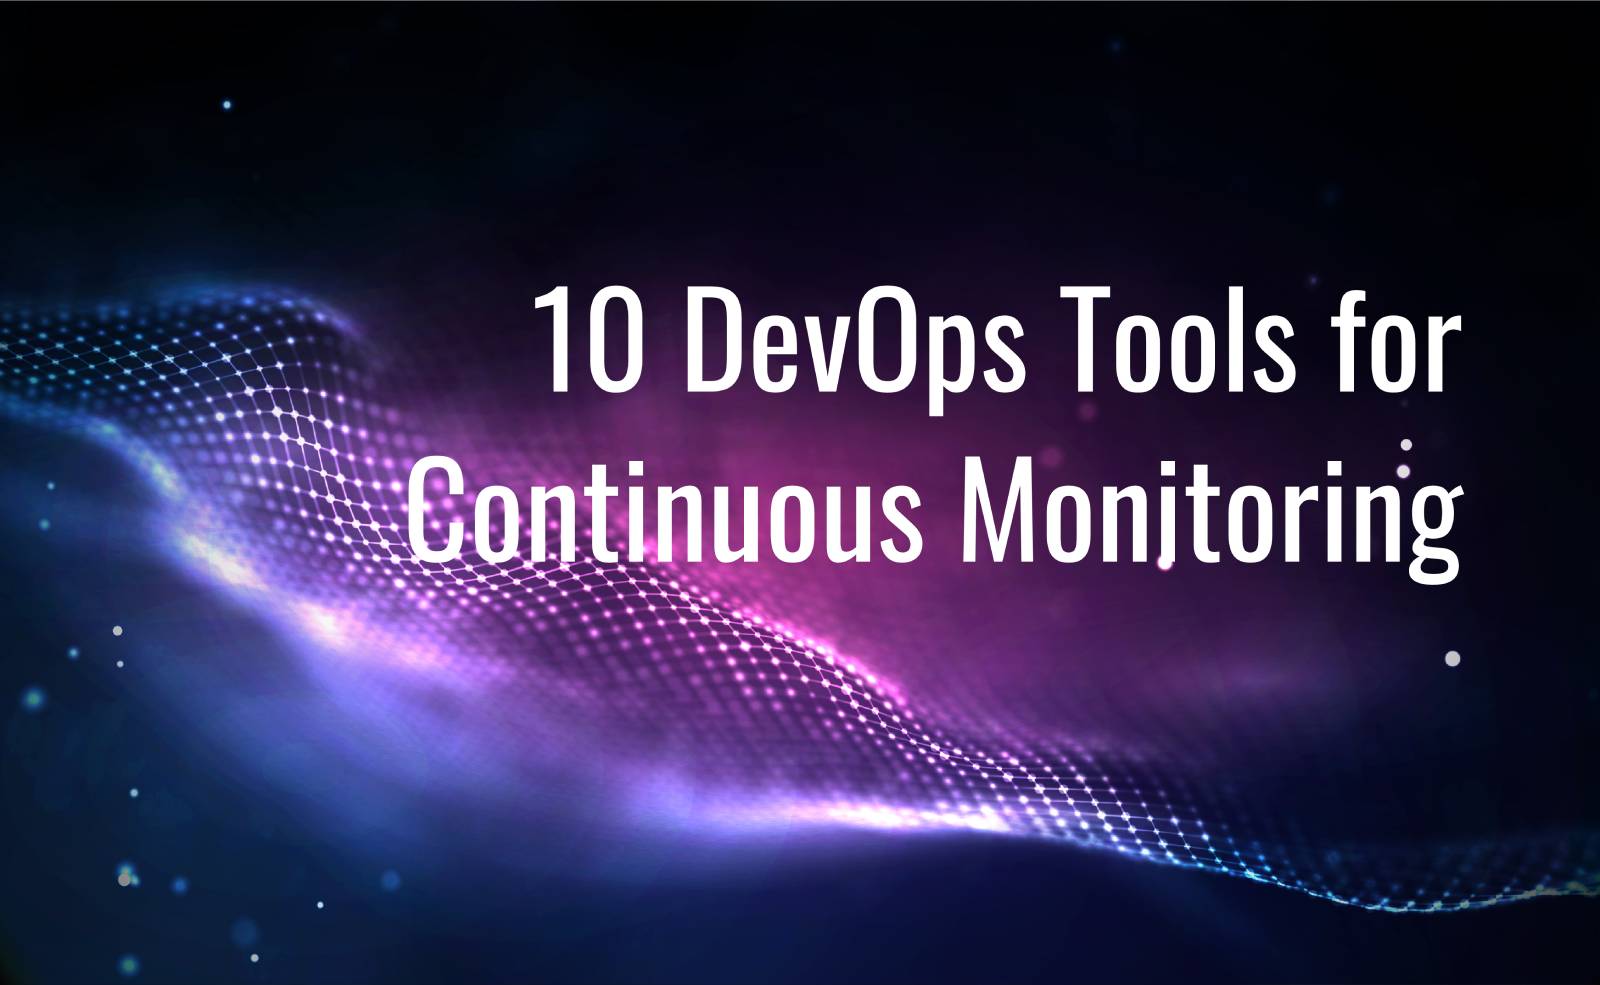 10 DevOps Tools for Continuous Monitoring